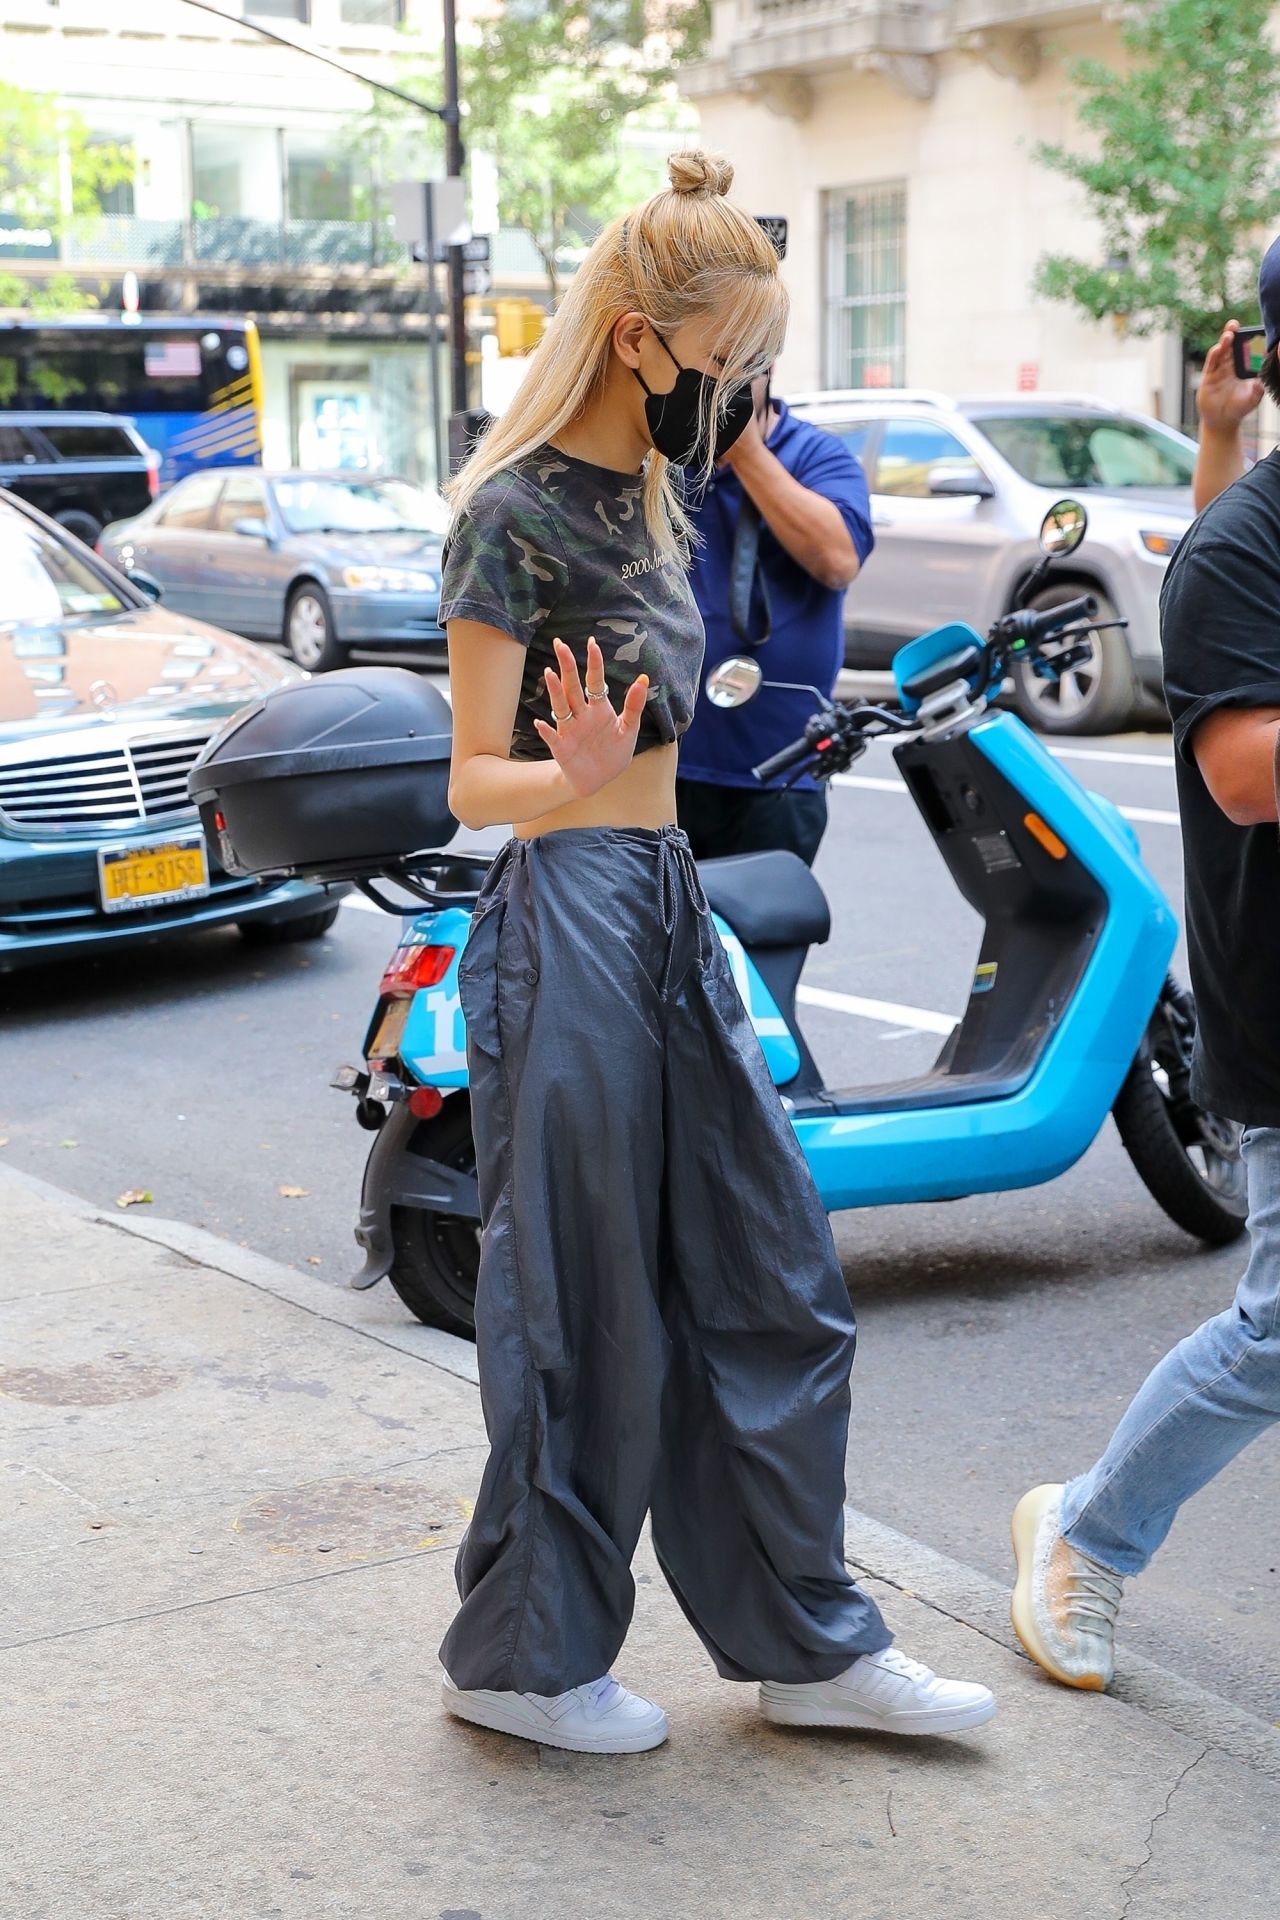 Rosé - Shopping at The Row Women's Clothing Store in New York 08/27 ...